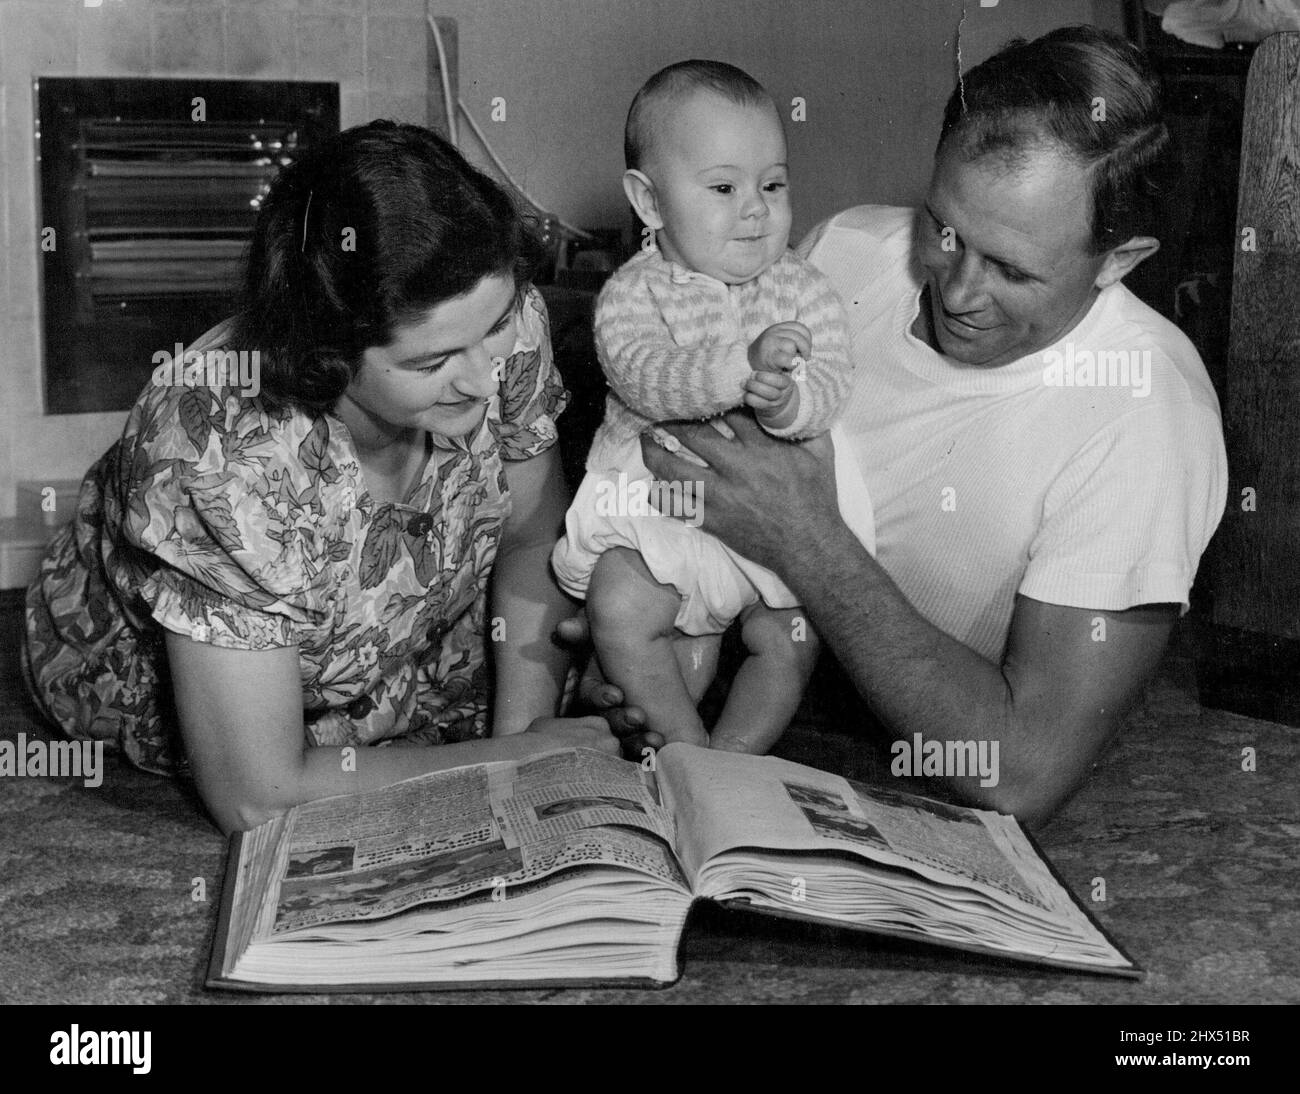 Bob and Mrs. Scott look through the scrapbook which they kept together of his deeds in Australia, while Bruce jigs happily. Bruce is just starting to climb up onto his feet, but Bob always puts him down. 'I want his legs to be good and straight for goal-kicking,' he explains. July 13, 1951. Stock Photo